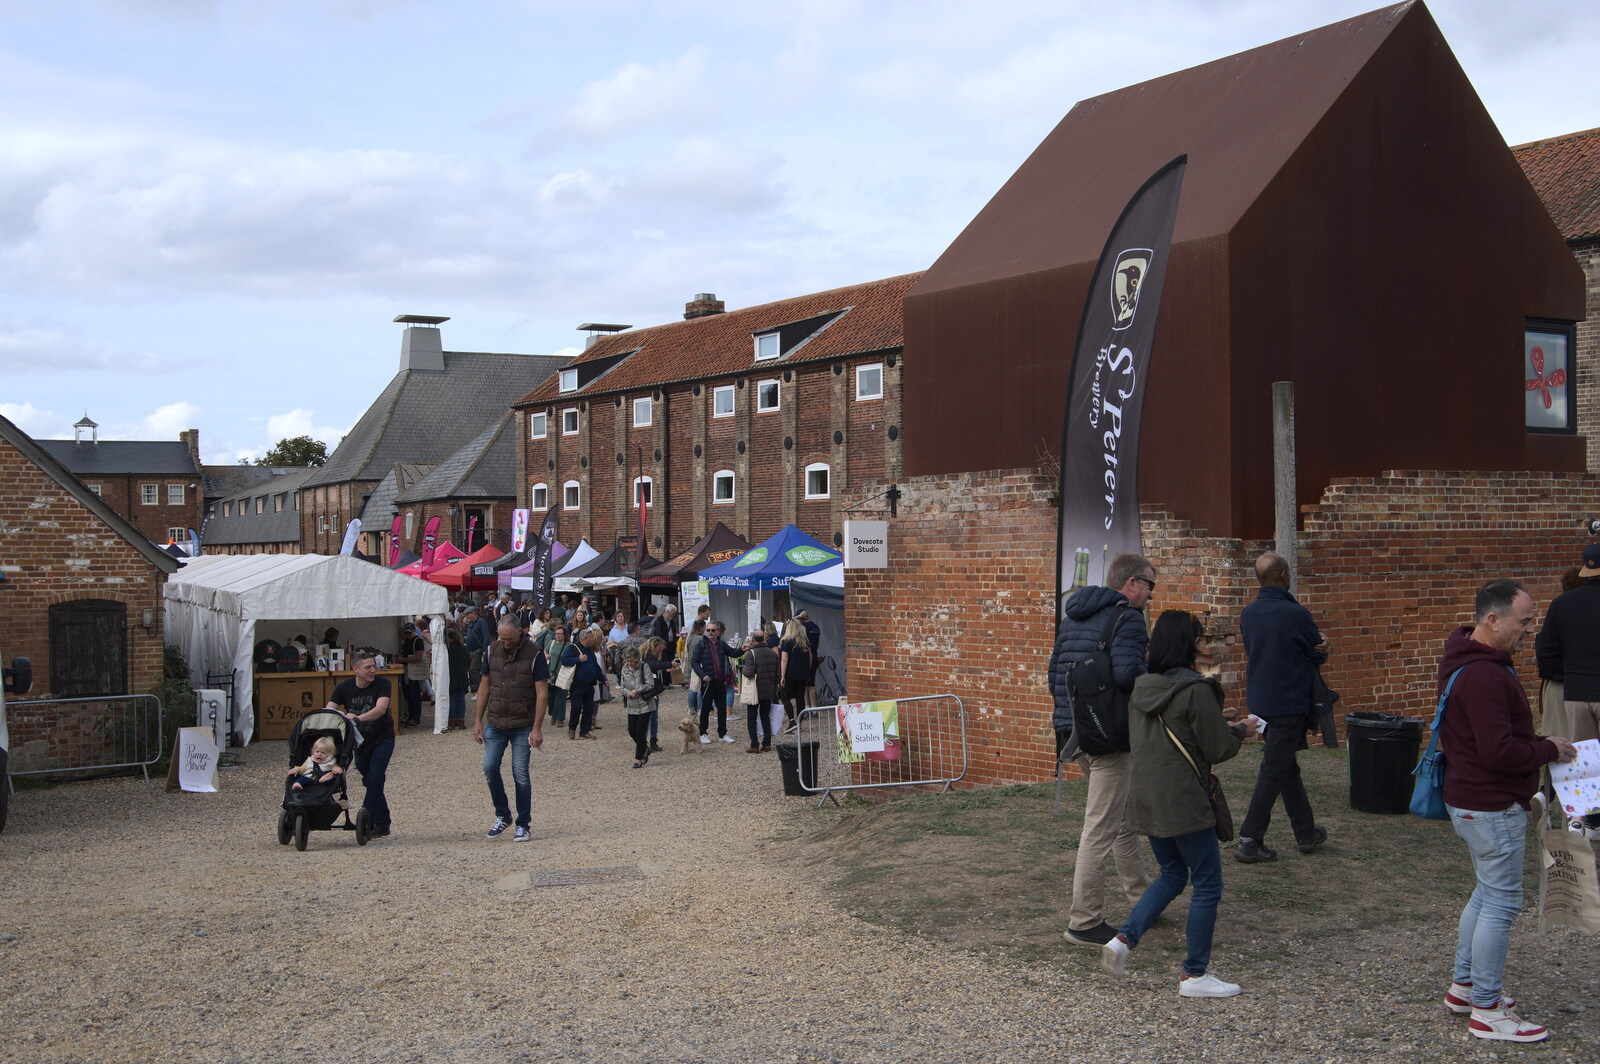 The crowds at Snape Maltings from The Aldeburgh Food Festival, Snape Maltings, Suffolk - 25th September 2022